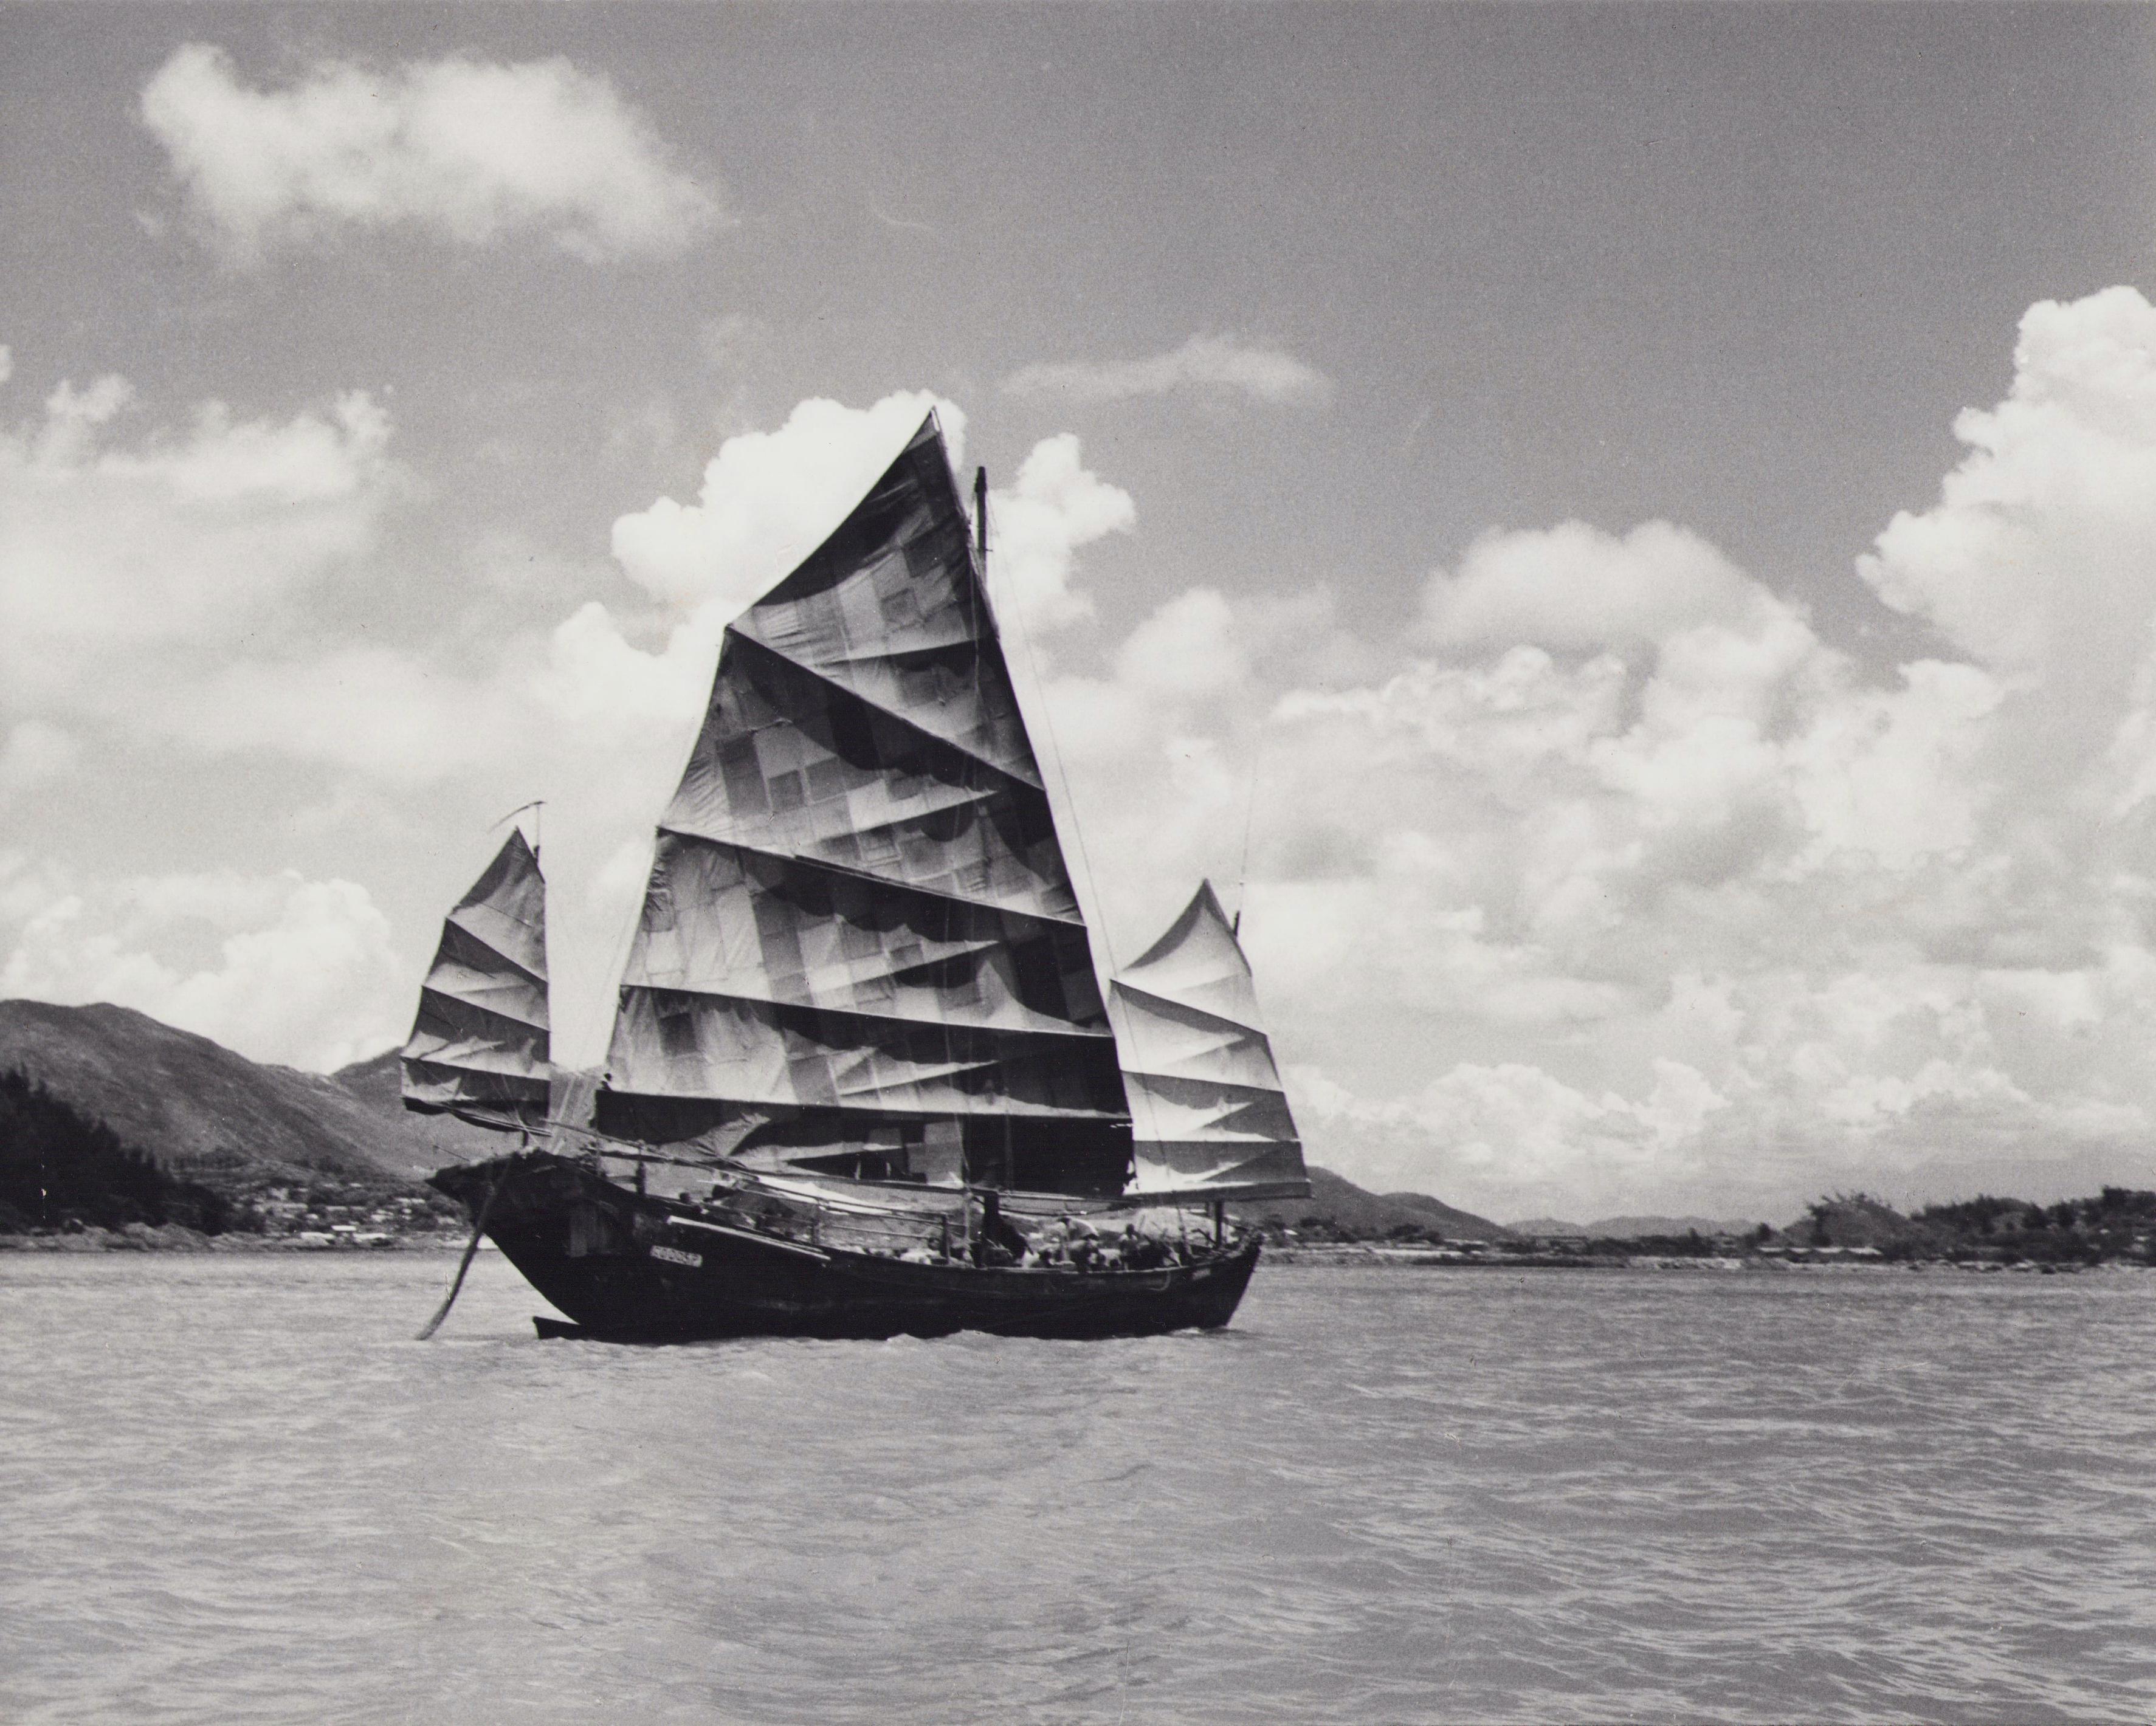 Hanna Seidel Portrait Photograph - Hong Kong, Boat, Water, Black and White Photography, 1960s, 23, 9 x 30, 1 cm